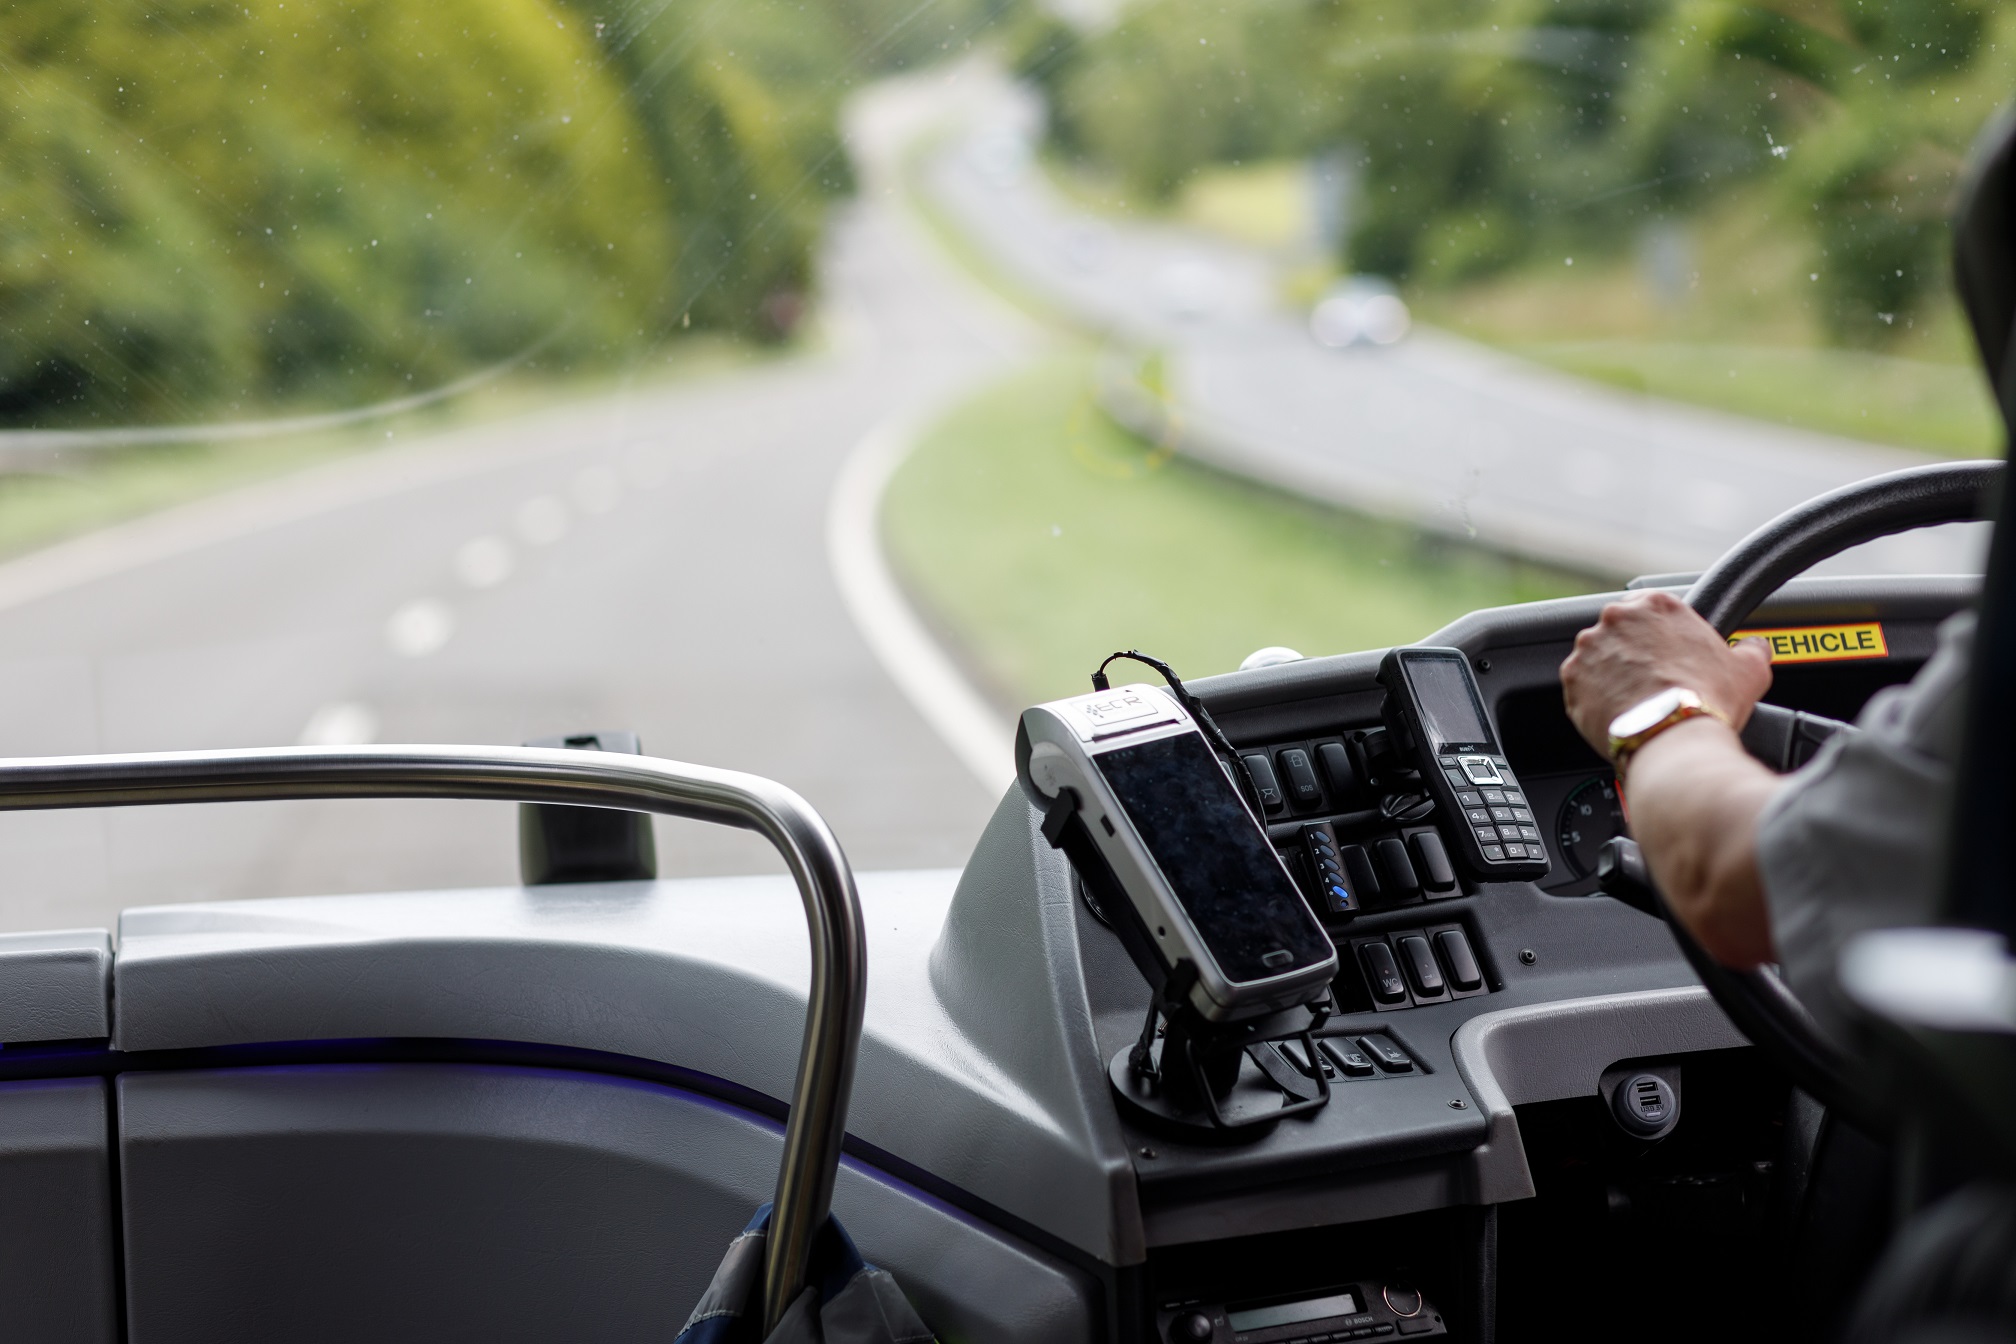 Coach and bus driving is rewarding, CPT research shows